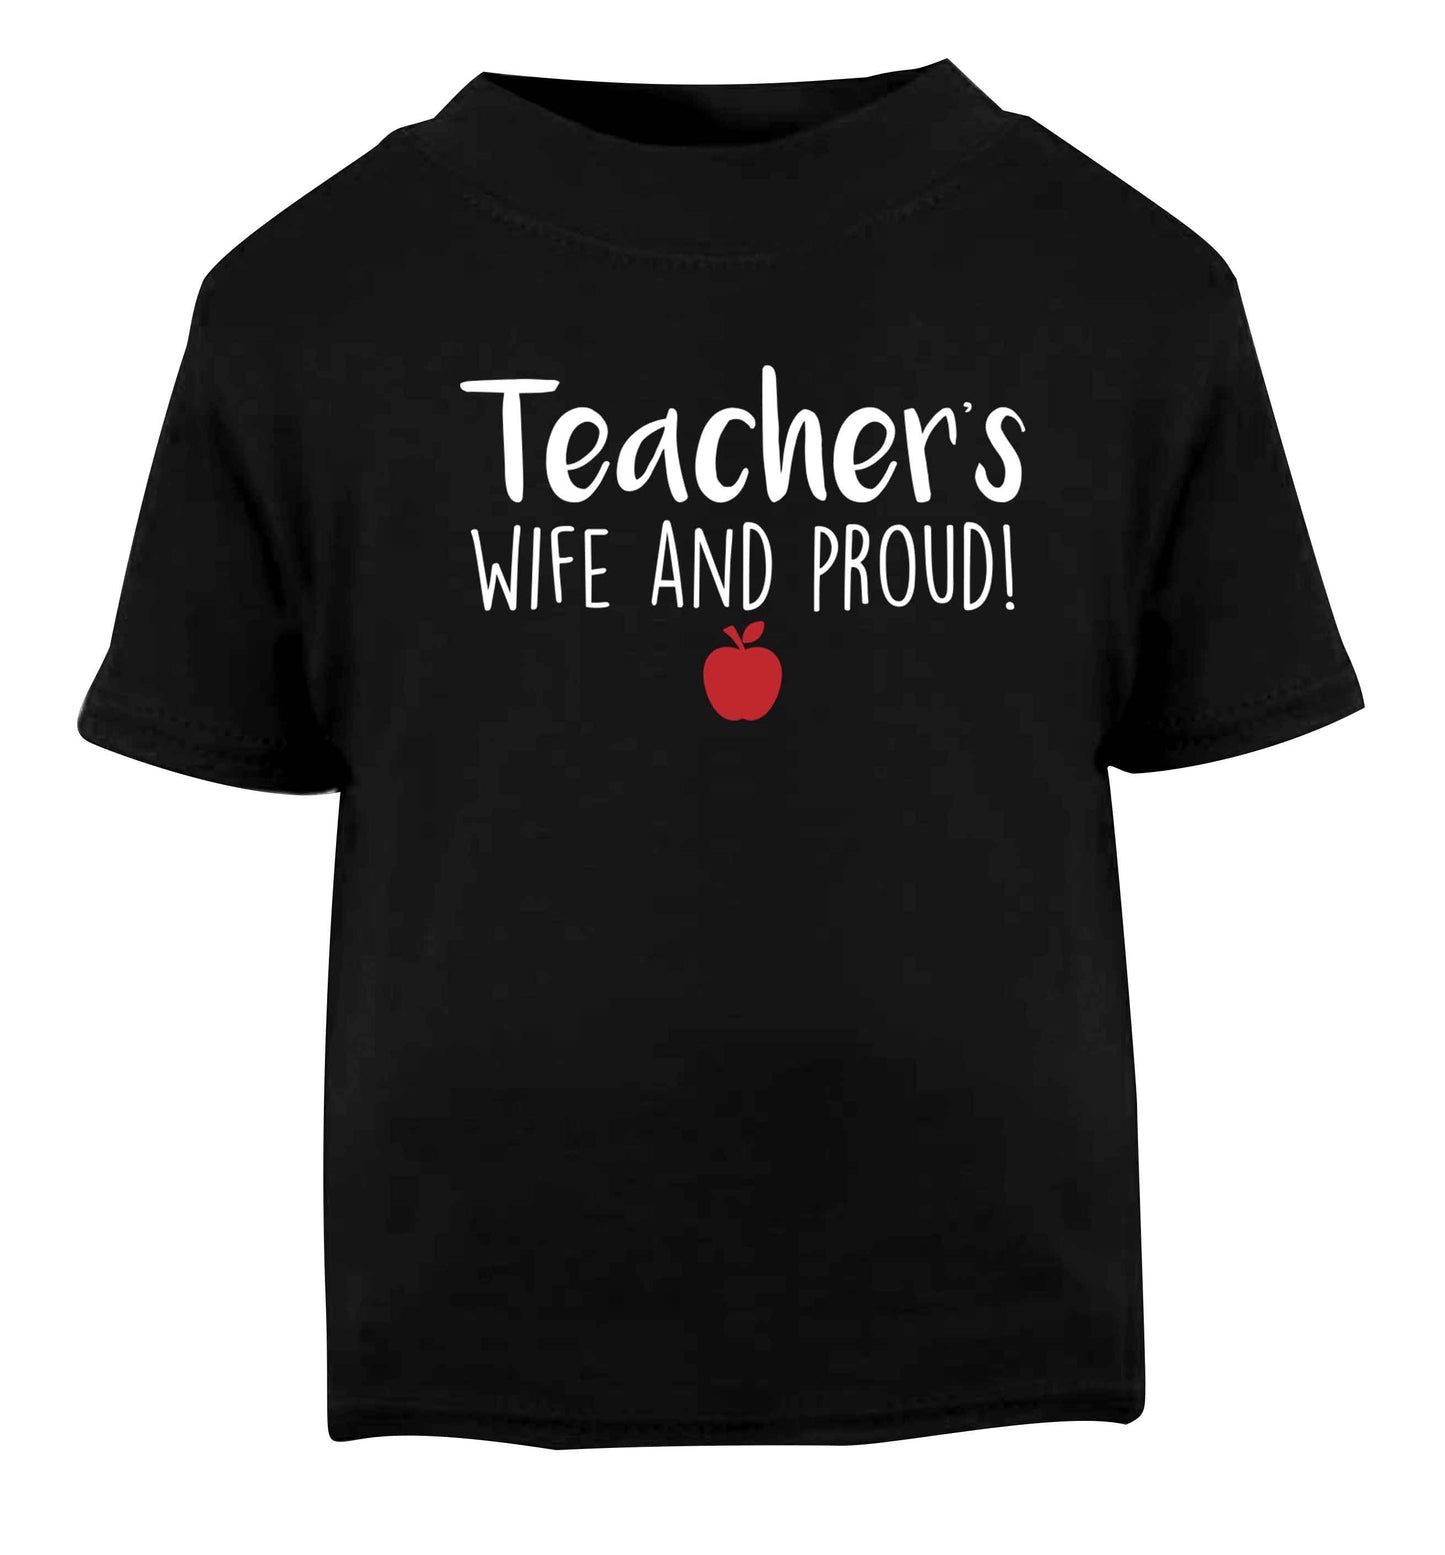 Teachers wife and proud Black baby toddler Tshirt 2 years